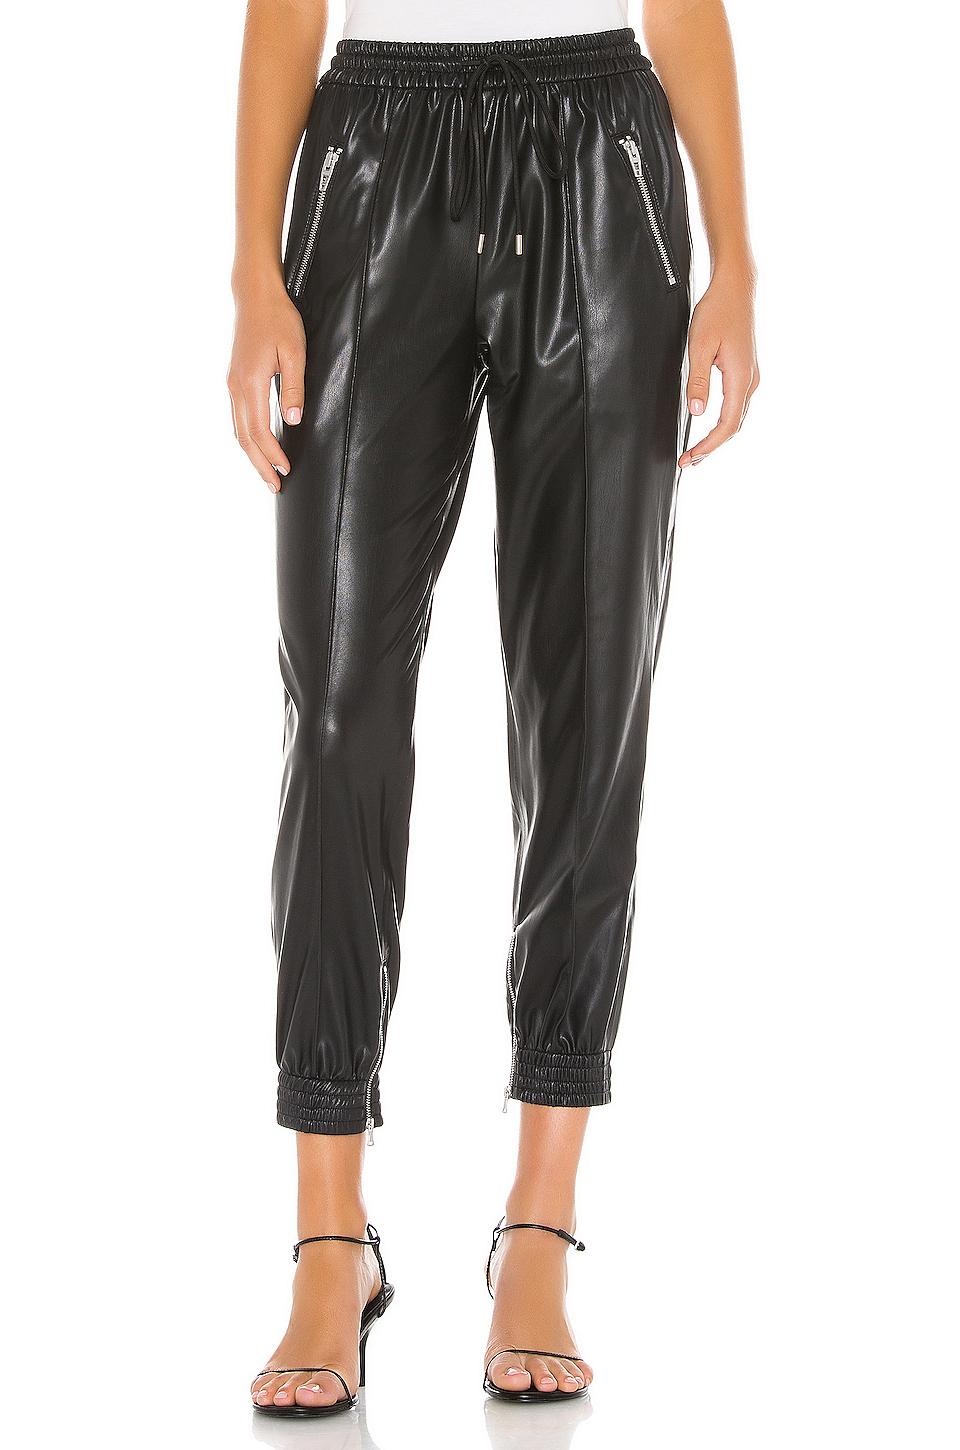 Blank NYC Running Wild Faux Leather Jogger in Black - Lyst